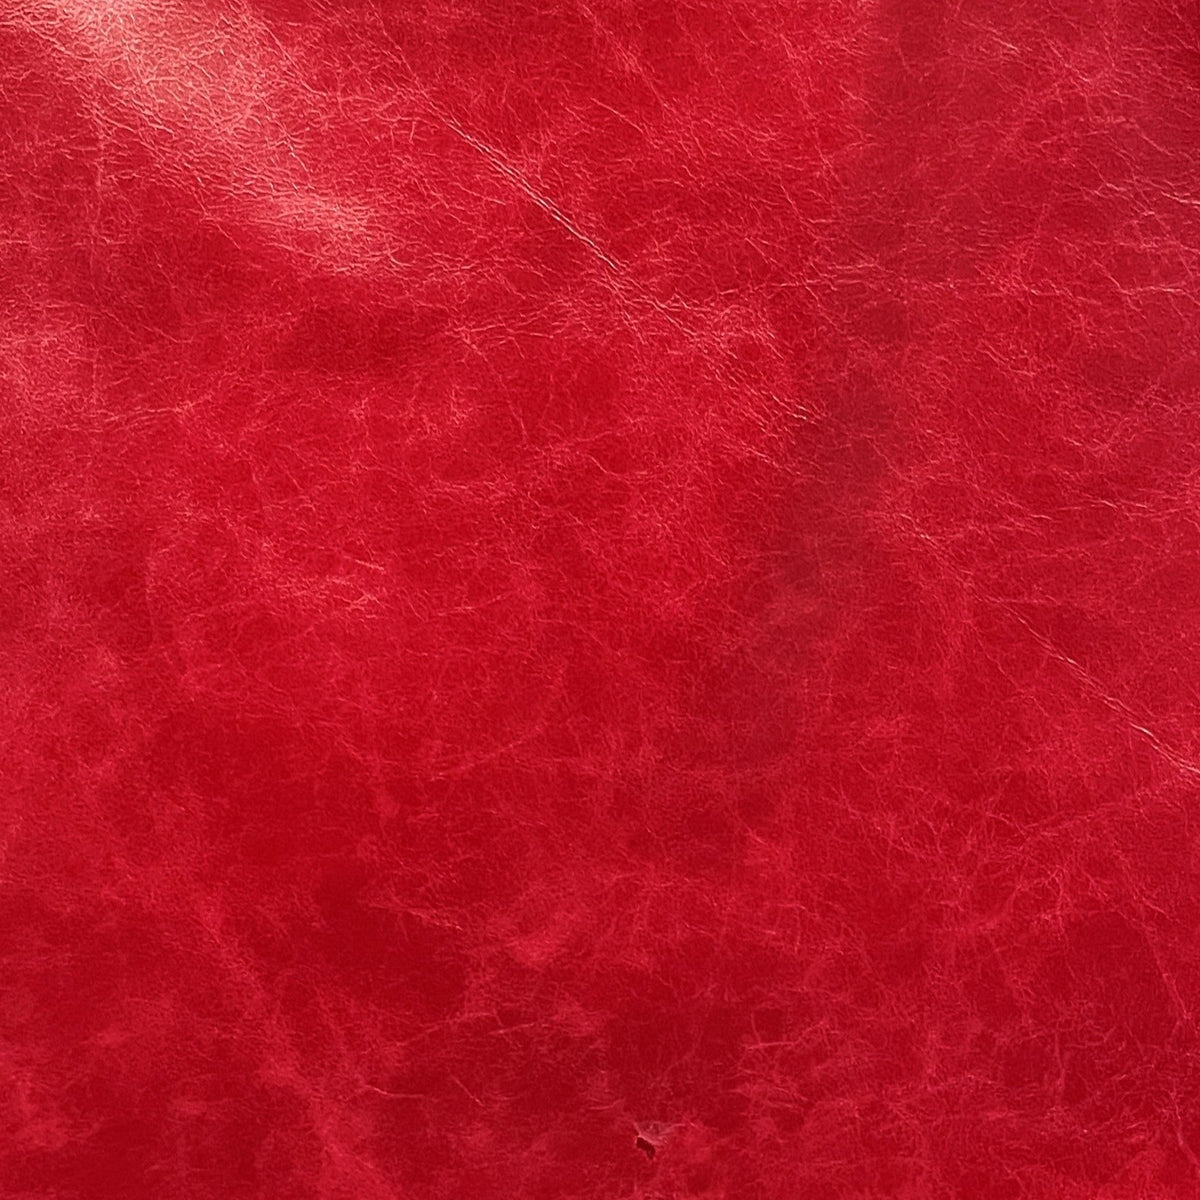 Dakota Red Cow Side | 0.8mm | 22 sq.ft | From $185 ea.